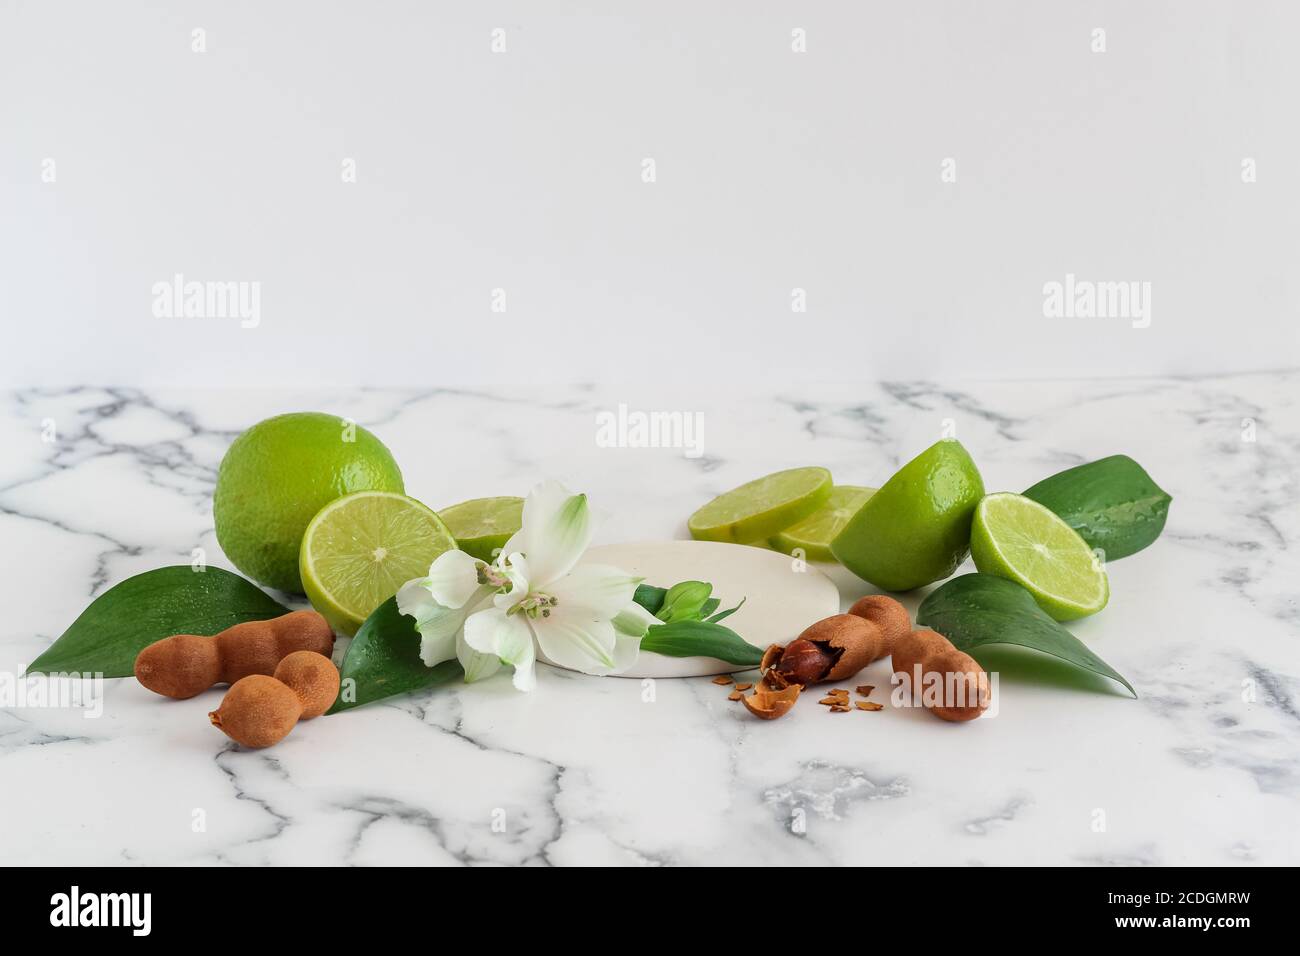 A staged mock up with sweet tamarind, green lemon and some blooms for cosmetics advertising Stock Photo